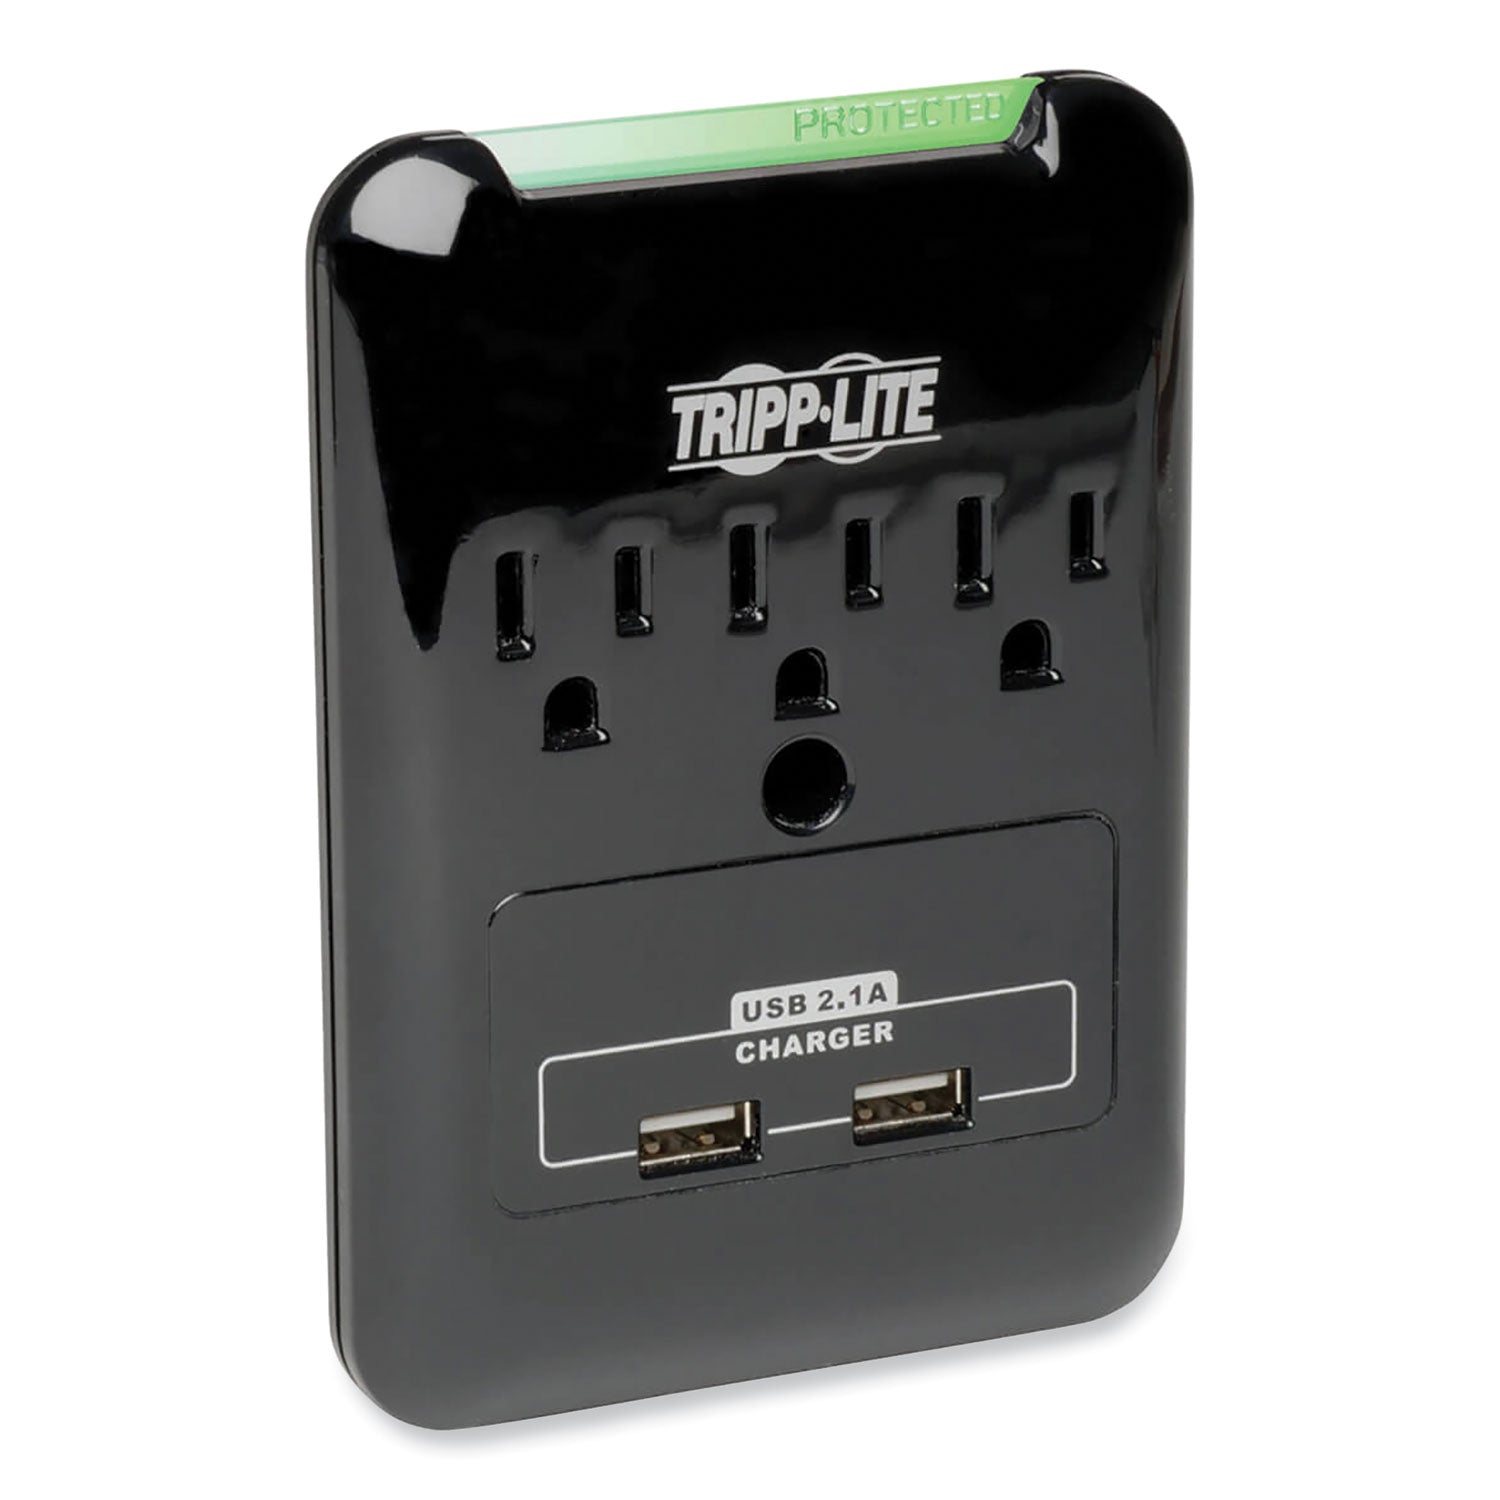 Protect It! Surge Protector, 3 AC Outlets/2 USB Ports, 540 J, Black - 